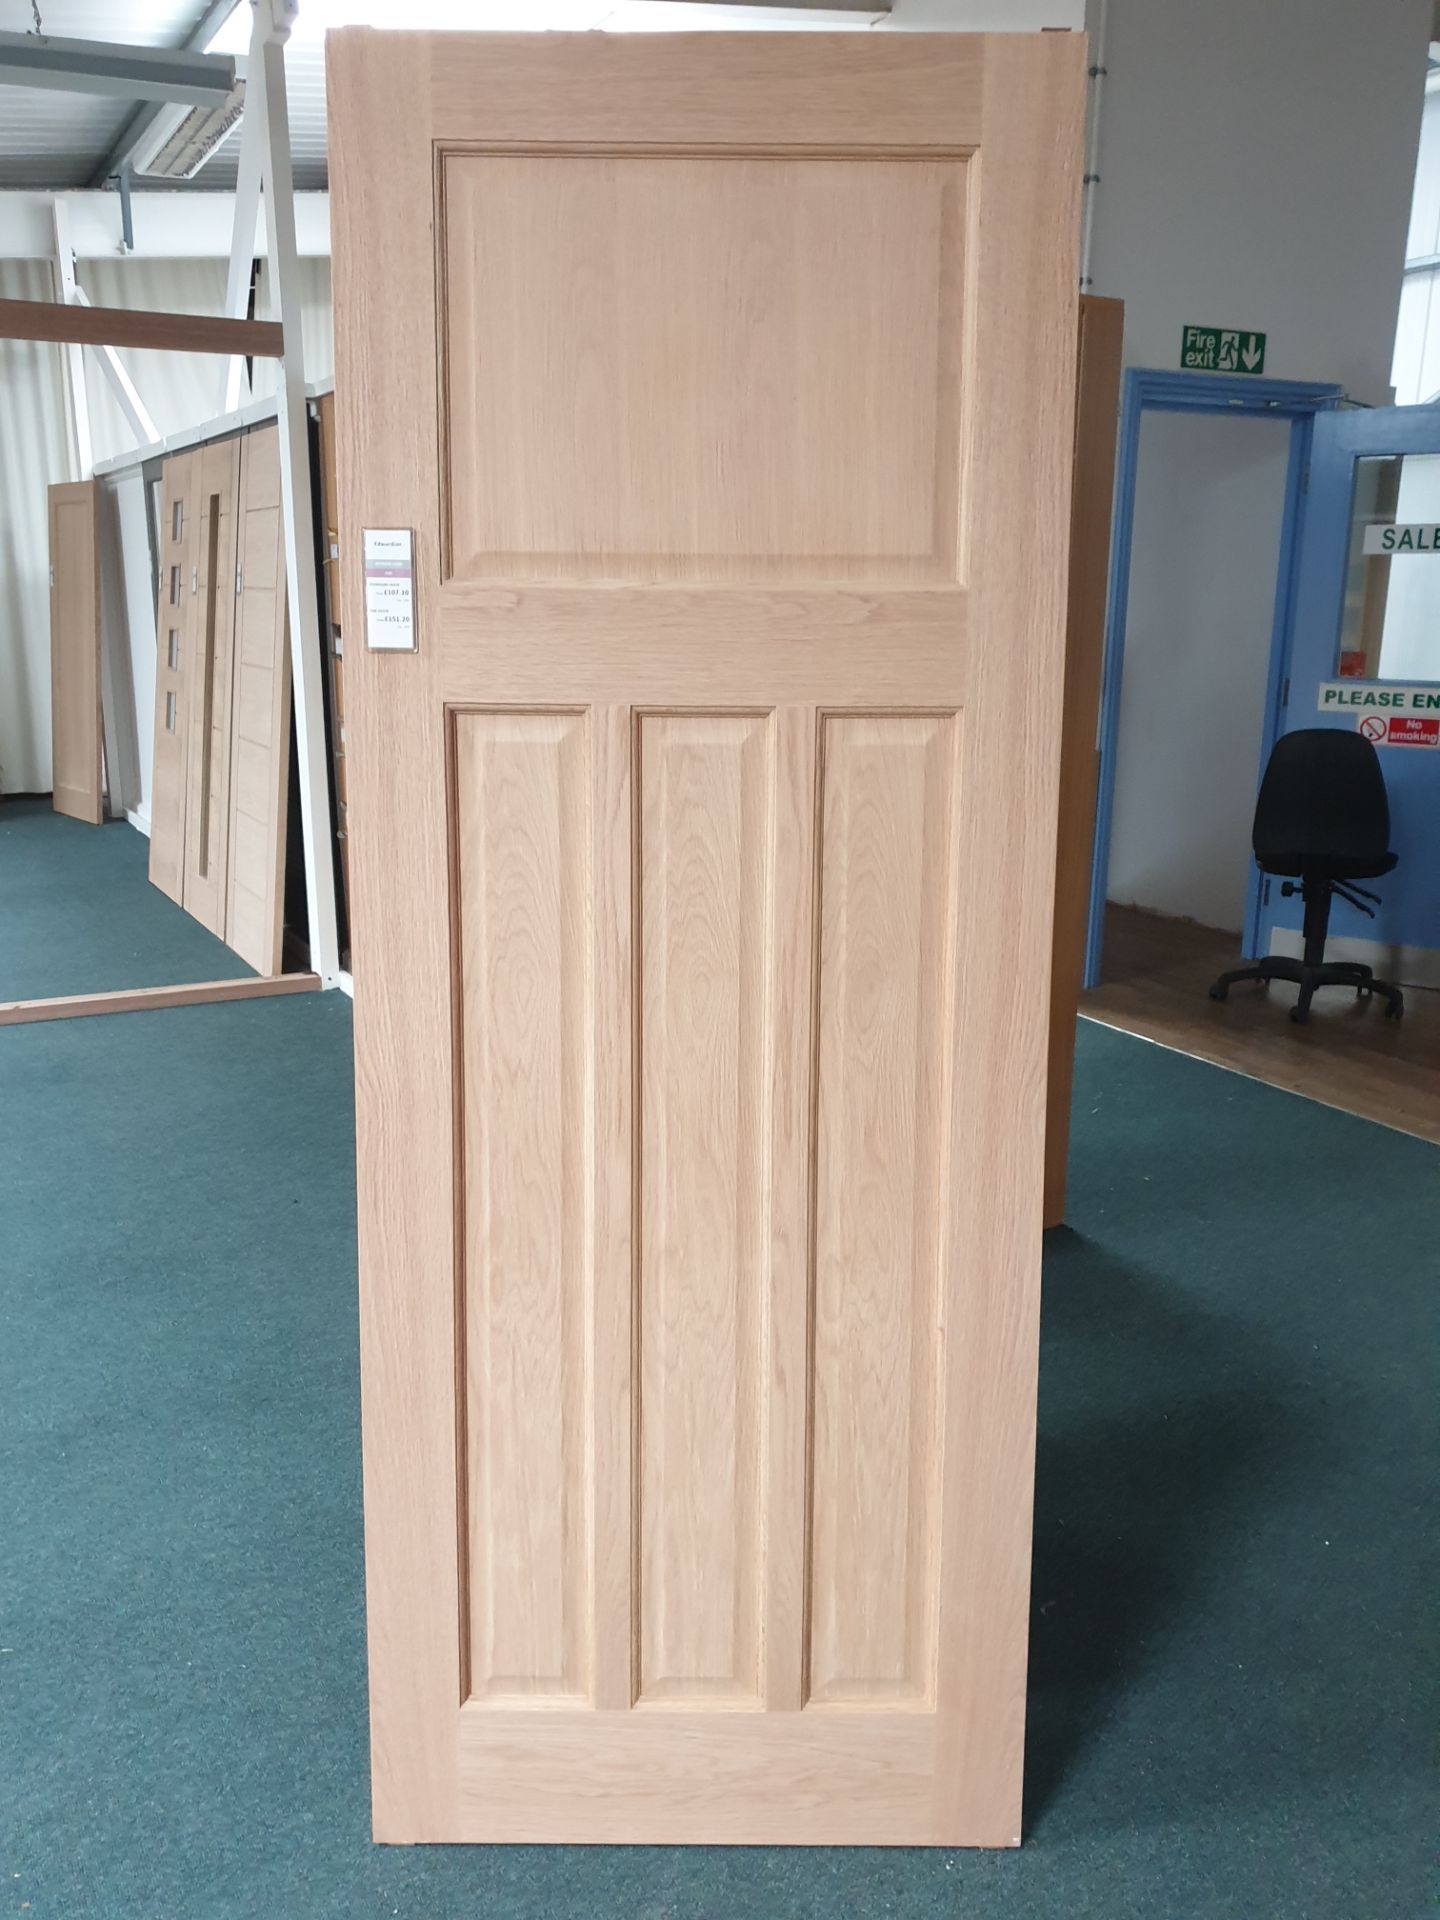 10 x Edwardian 4 panel JAWOEDW24 Internal Door, 78” x 24” x 35mm - Lots to be handed out in order